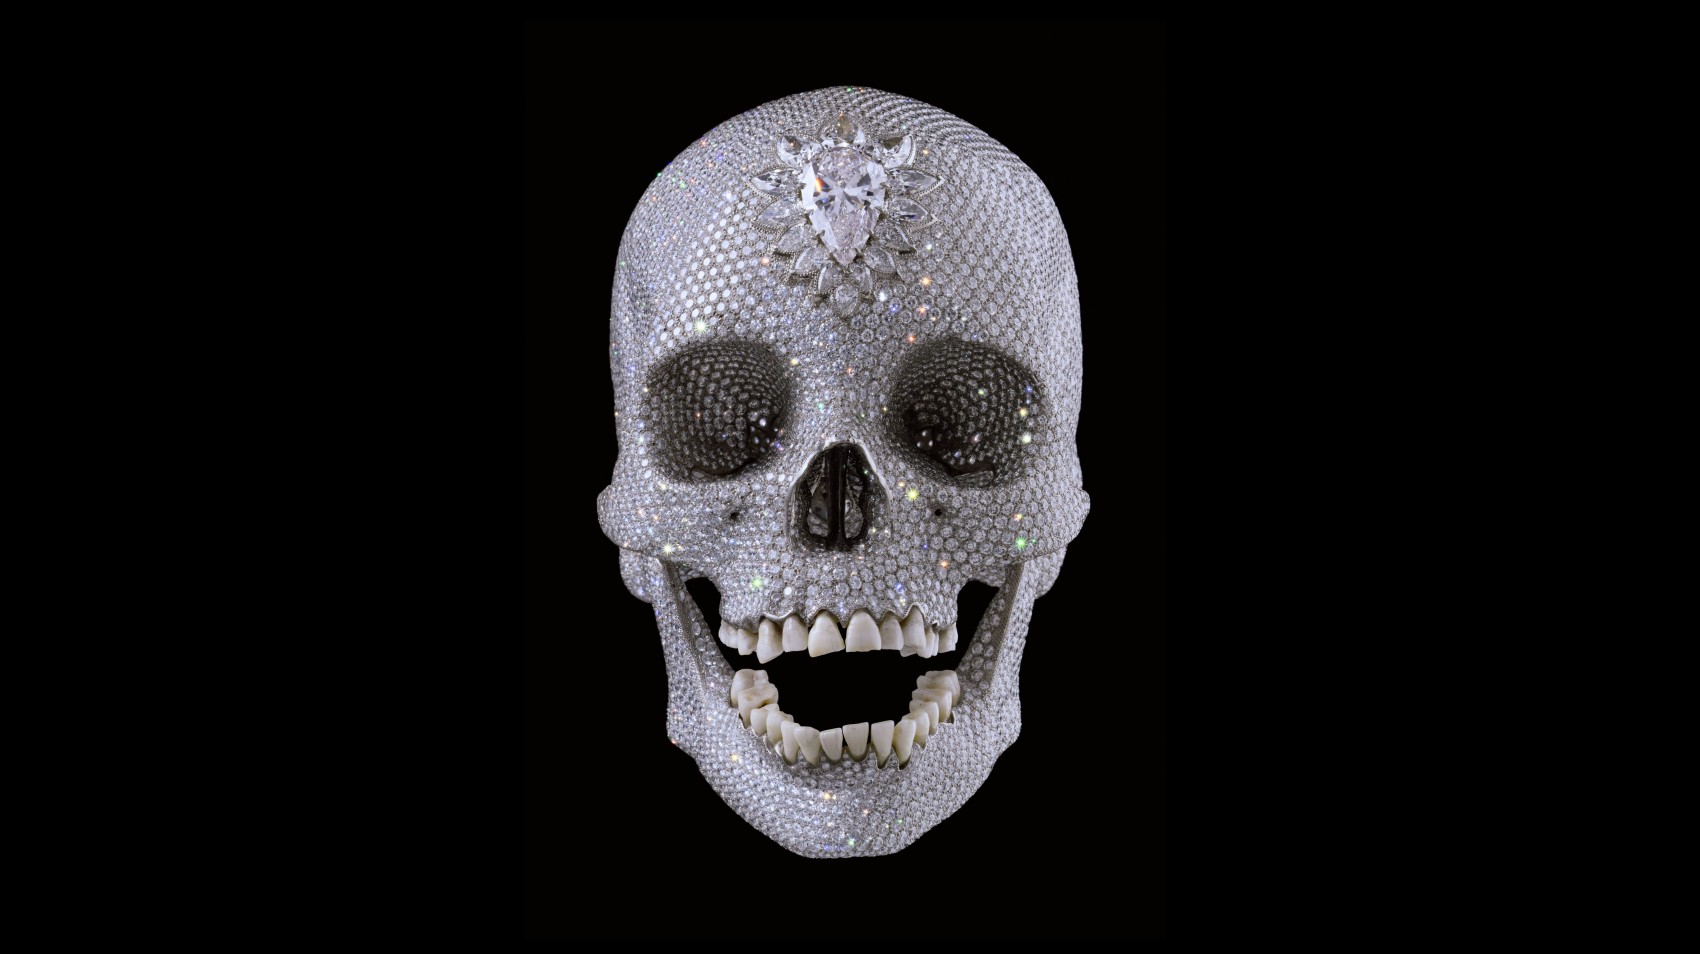 Damien Hirst For the love of God (2007), foto Prudence Cuming Associates ©Damien Hirst and Science Ltd. All rights reserved, DACS 2012